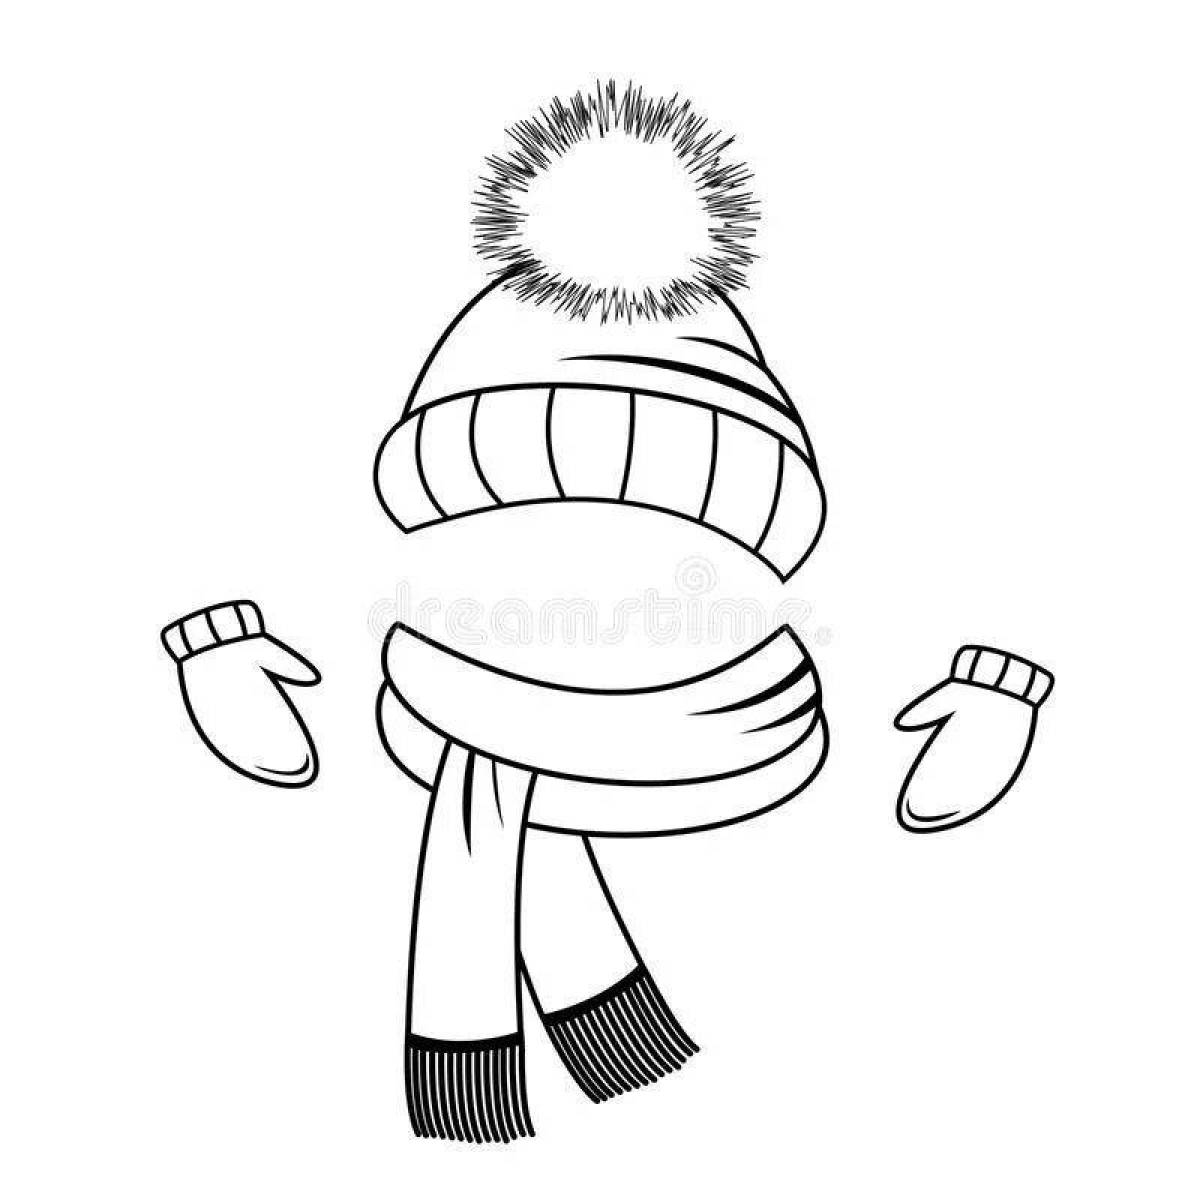 Awesome beginner hat and scarf coloring page